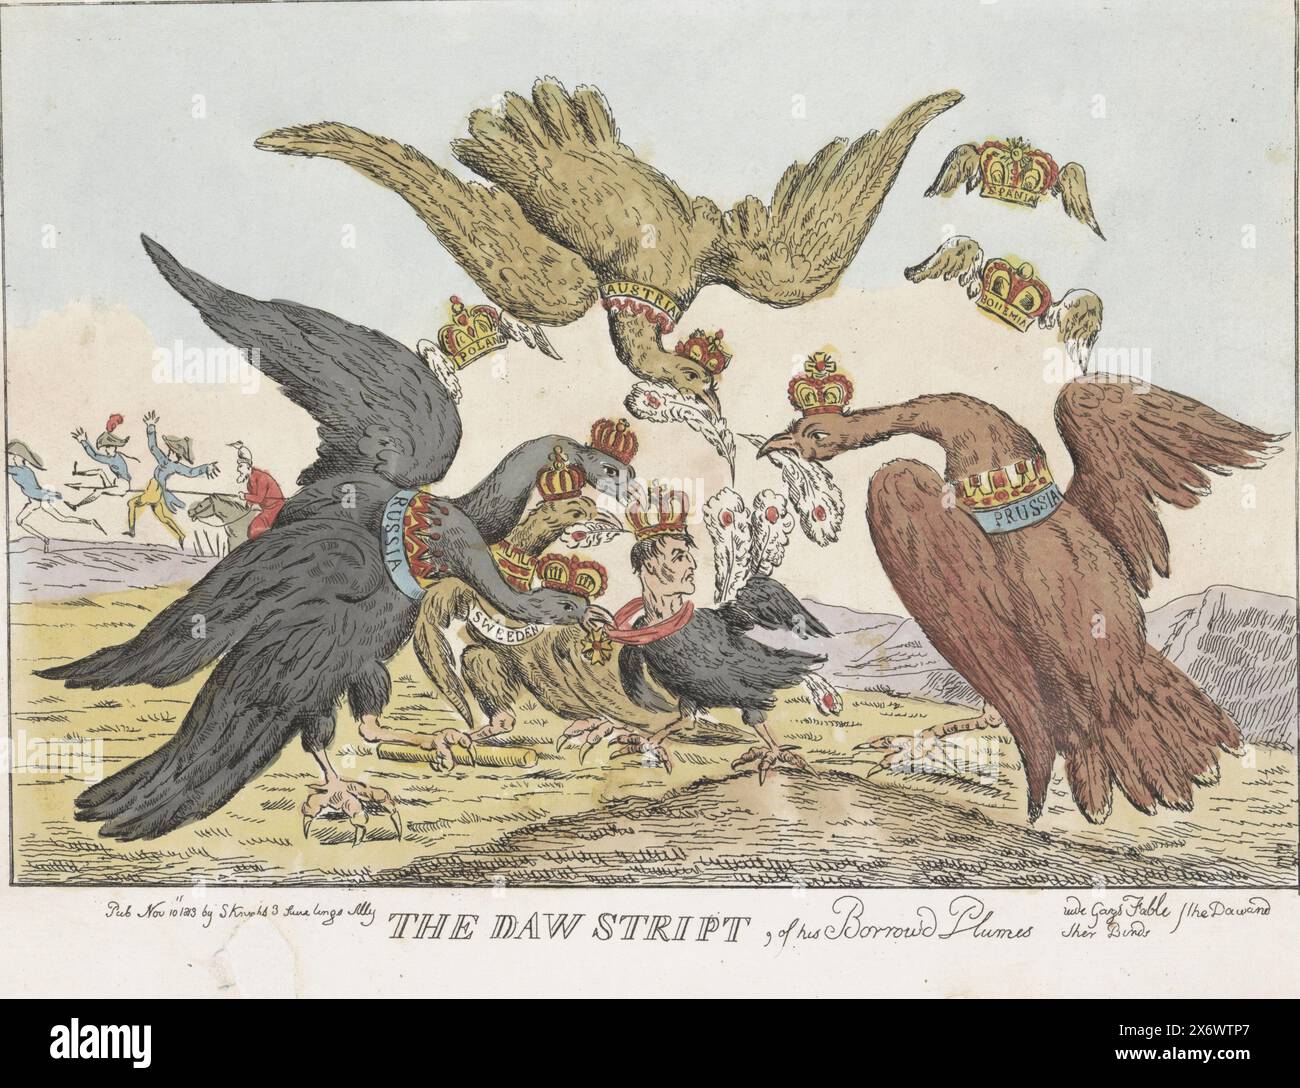 The jackdaw stripped of its borrowed feathers, 1813, The Daw Stript, of his Borrowed Plumes, vide Gays Fable the Daw other Birds (title on object), Cartoon of Napoleon after his loss at the battle of Leipzig, 1813. Four large eagles ( Russia, Prussia, Austria and Sweden) pluck the feathers from a jackdaw with the head of Napoleon. The jackdaw had decorated himself with these peacock feathers. Three winged crowns (Poland, Bohemia and Spain) fly away. In the background a Russian Cossack stabs two French soldiers with his lance. The print includes a separate Dutch statement., print, print maker Stock Photo